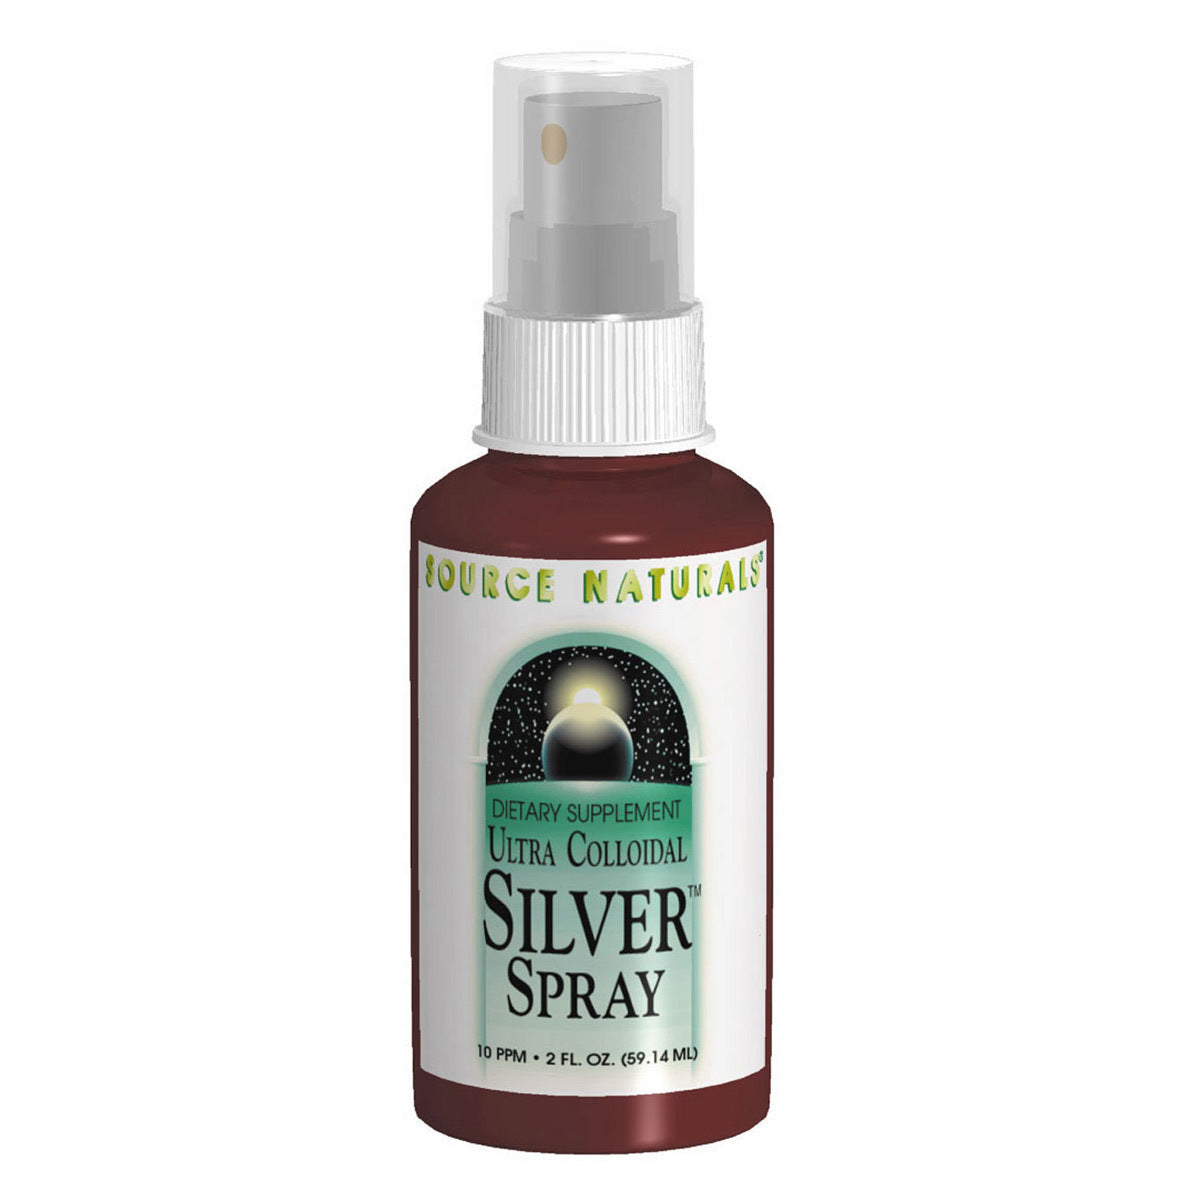 Primary image of Colloidal Silver Throat Spray